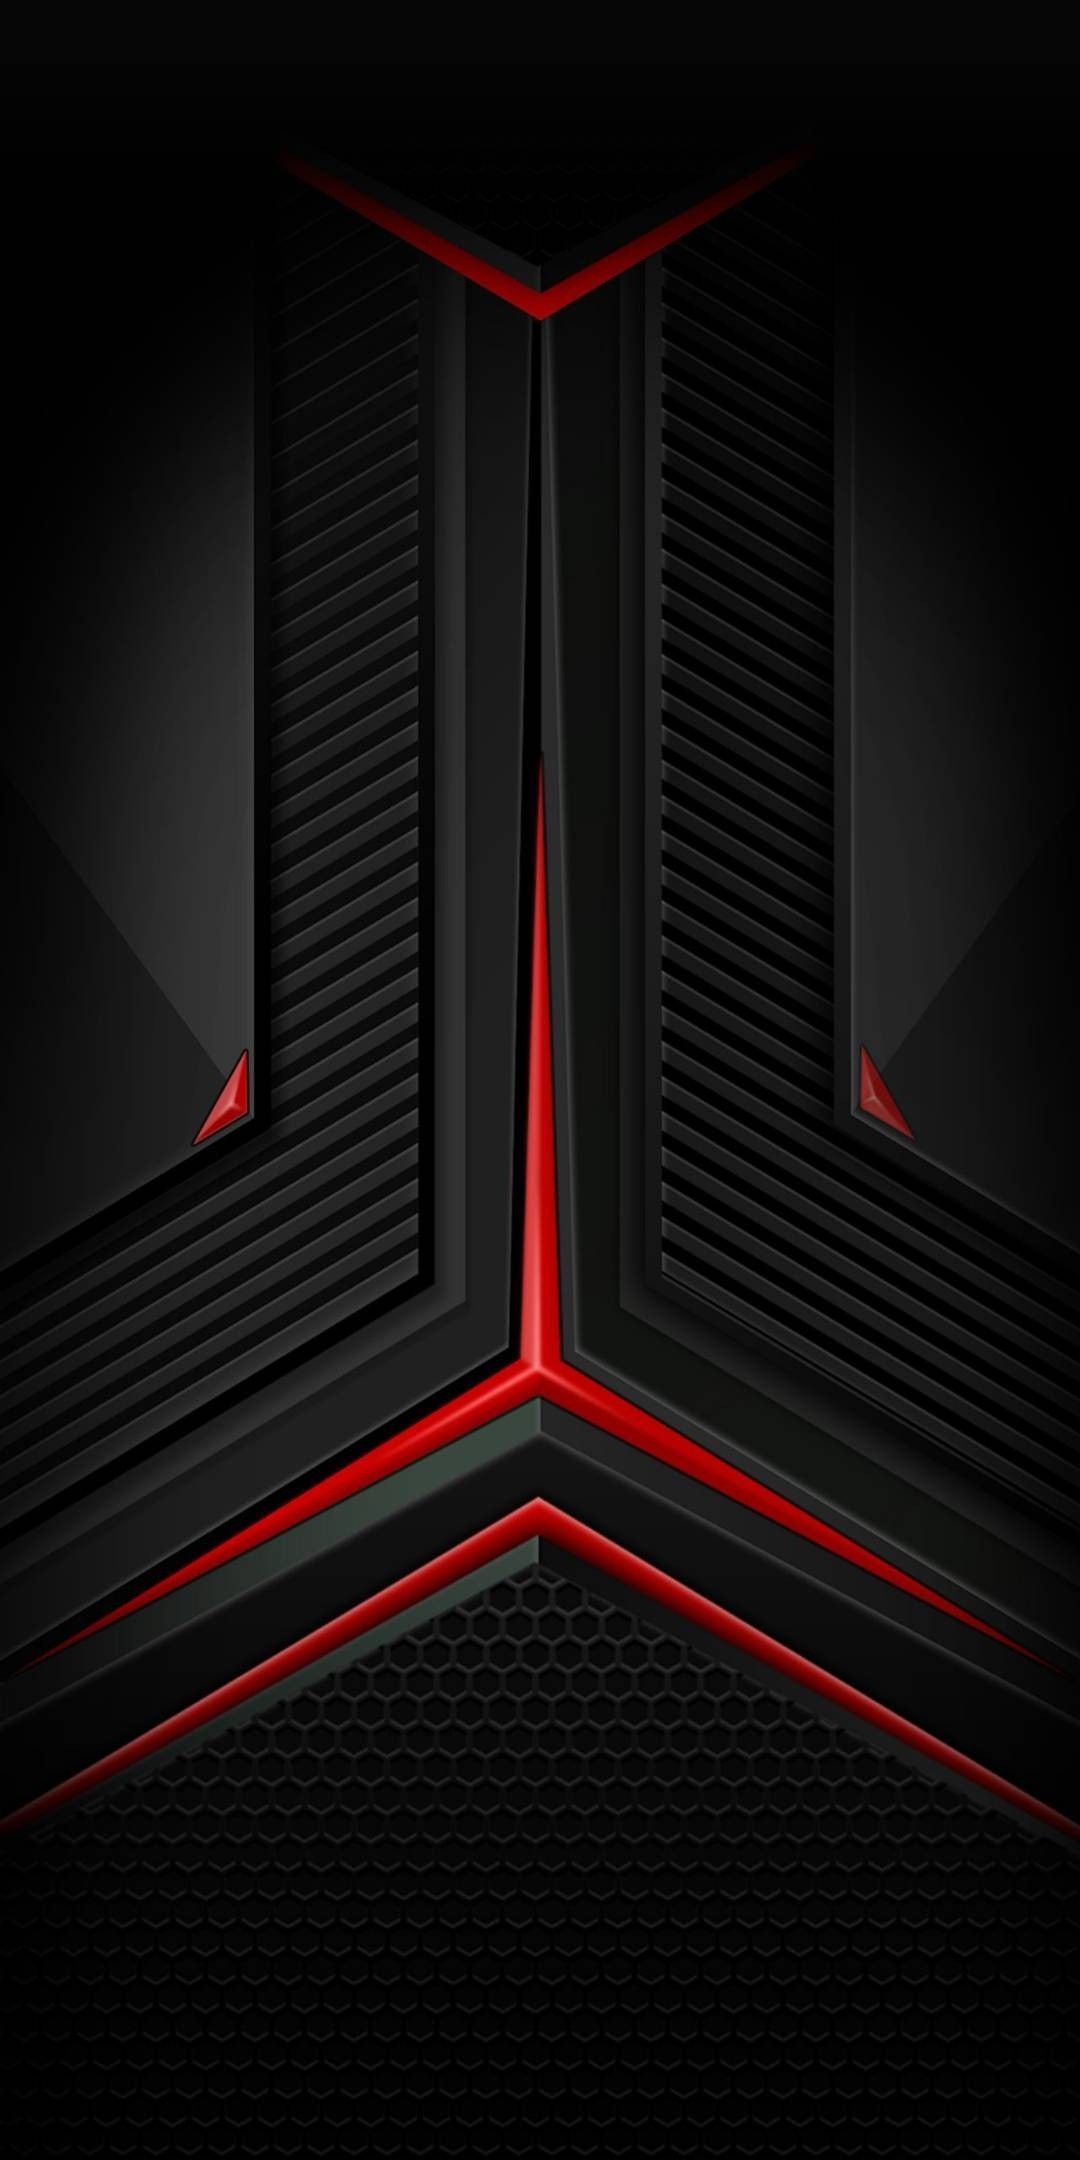 Black And Red High Tech Wallpaper